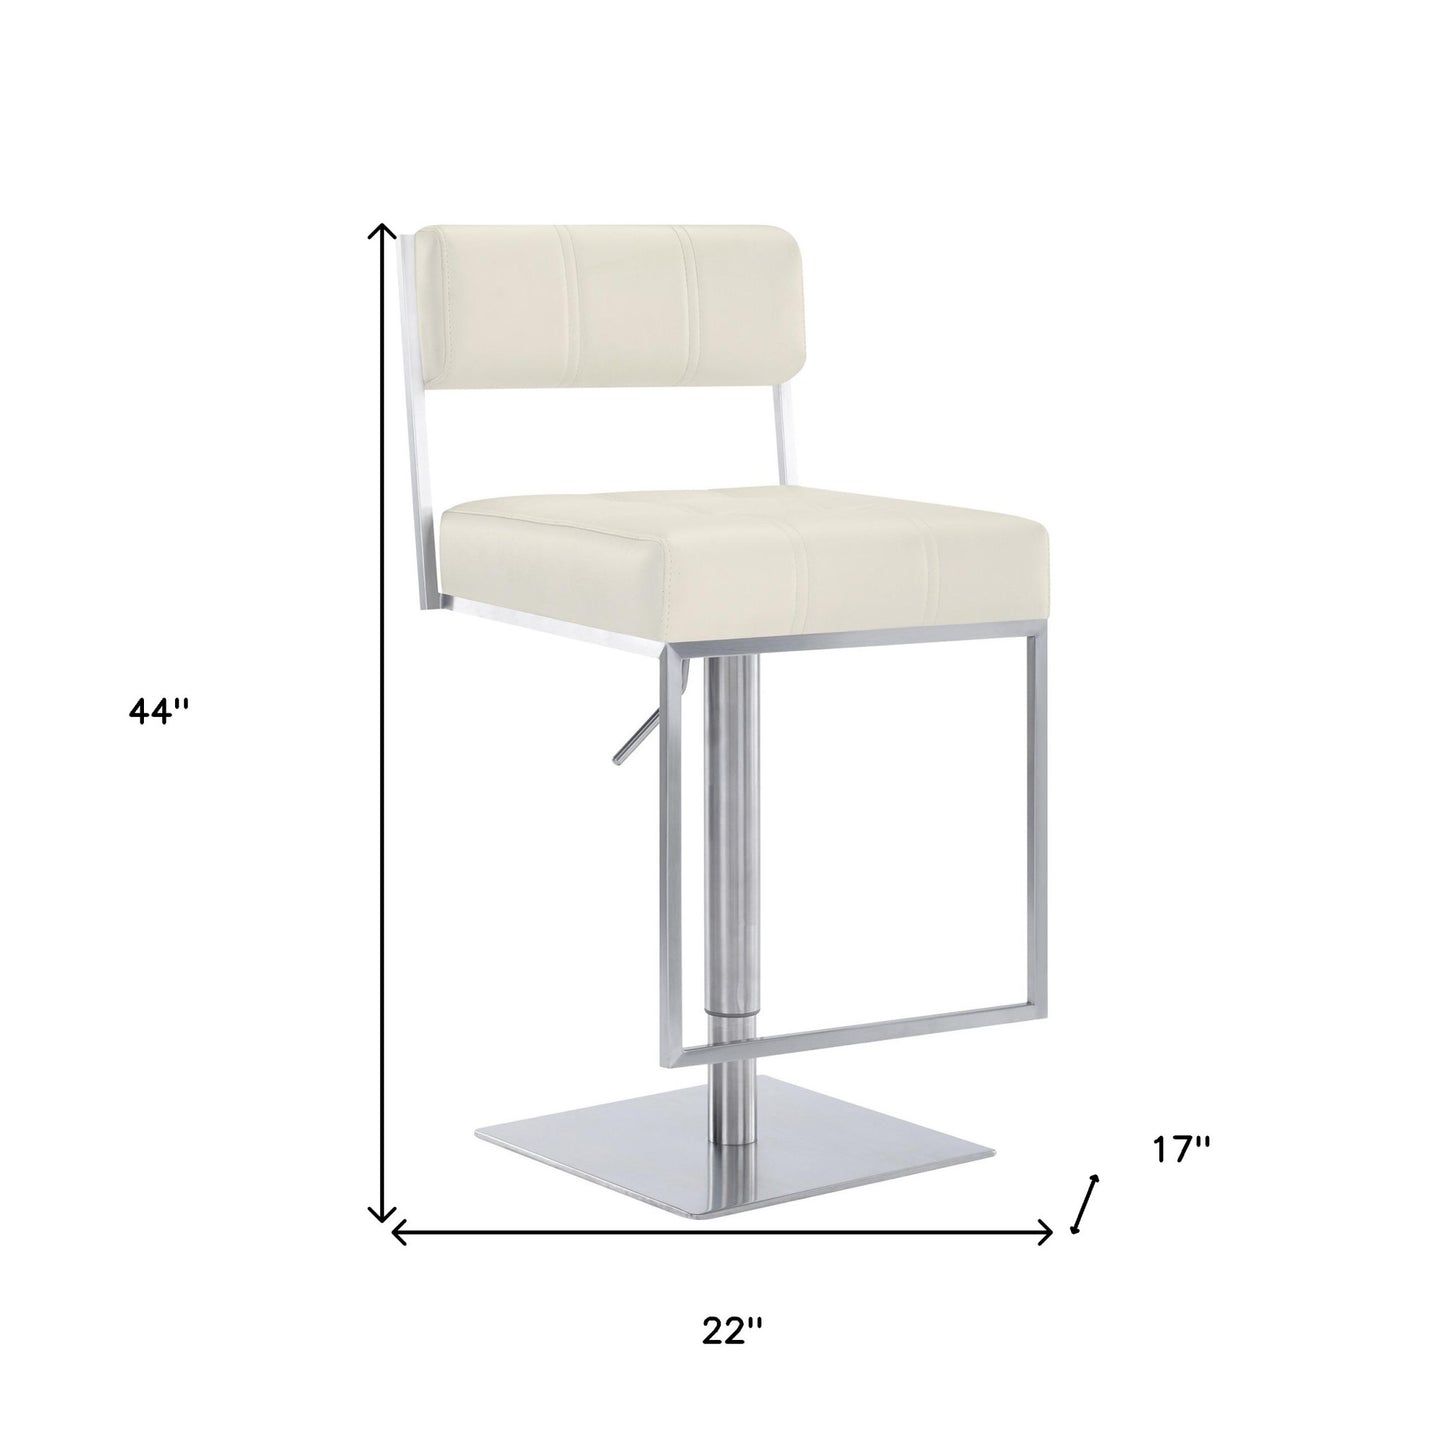 44" White Faux Leather And Iron Swivel Adjustable Height Bar Chair